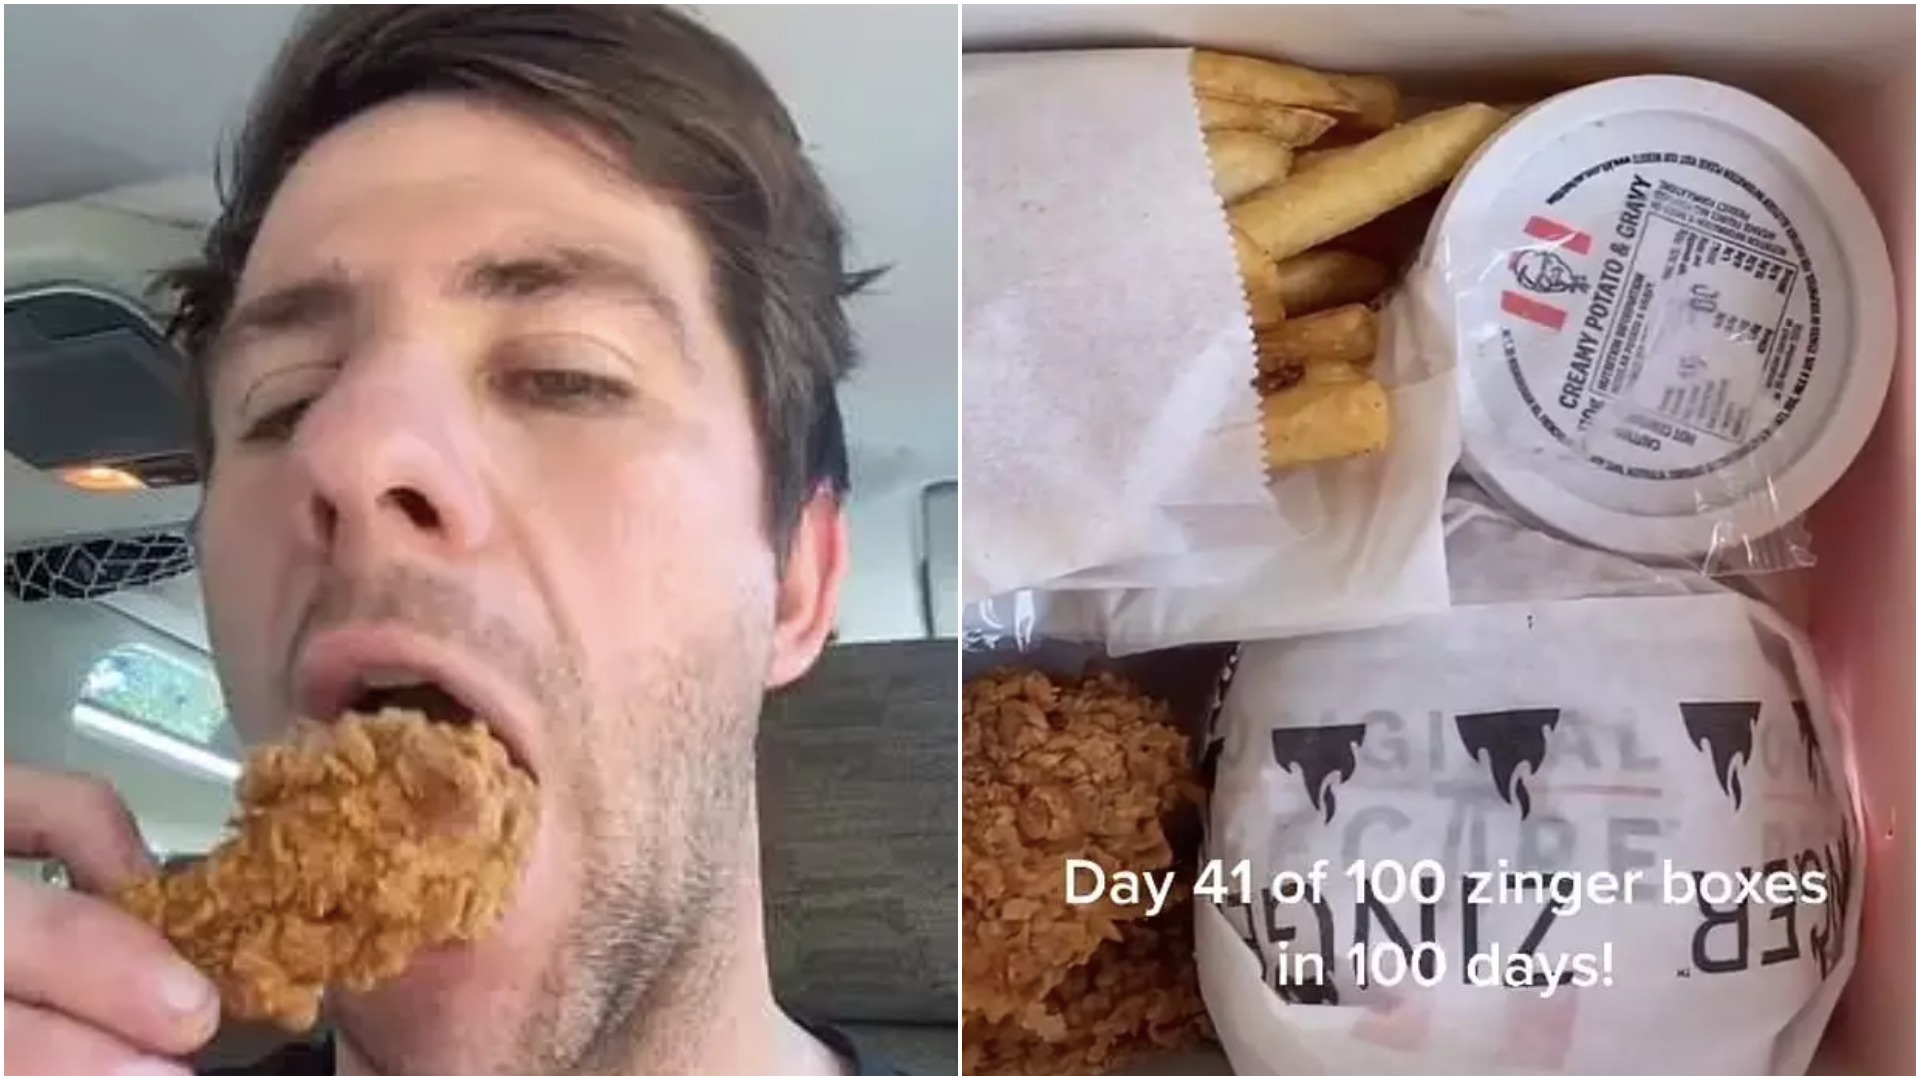 A Guy On TikTok Is Eating 100 Zinger Boxes In 100 Days & IDK If I Love Or Hate This For Him